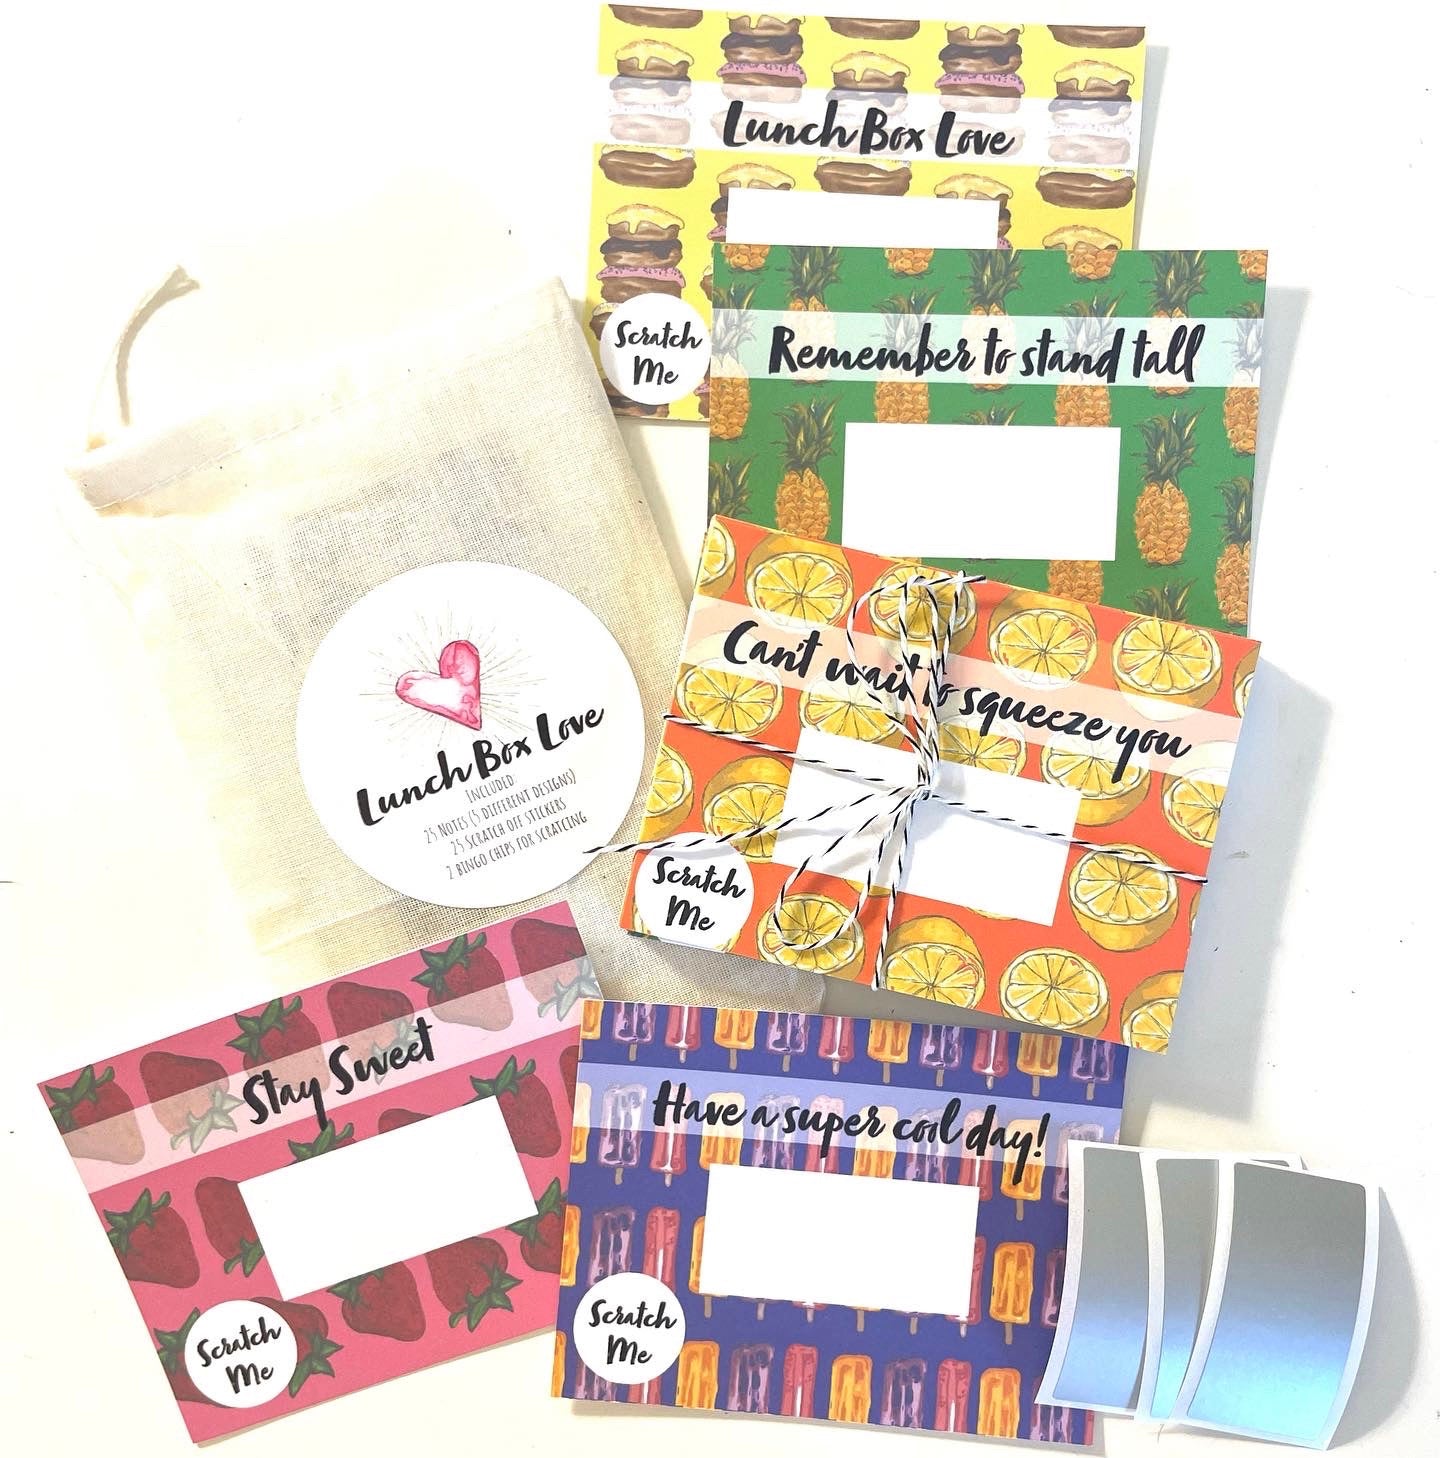 These adorable cards will bring a smile to any child's face! Kids (and grown ups for that matter) love notes in their lunch boxes. This set of 25 cards is very unique and really adds so much fun to their day! 